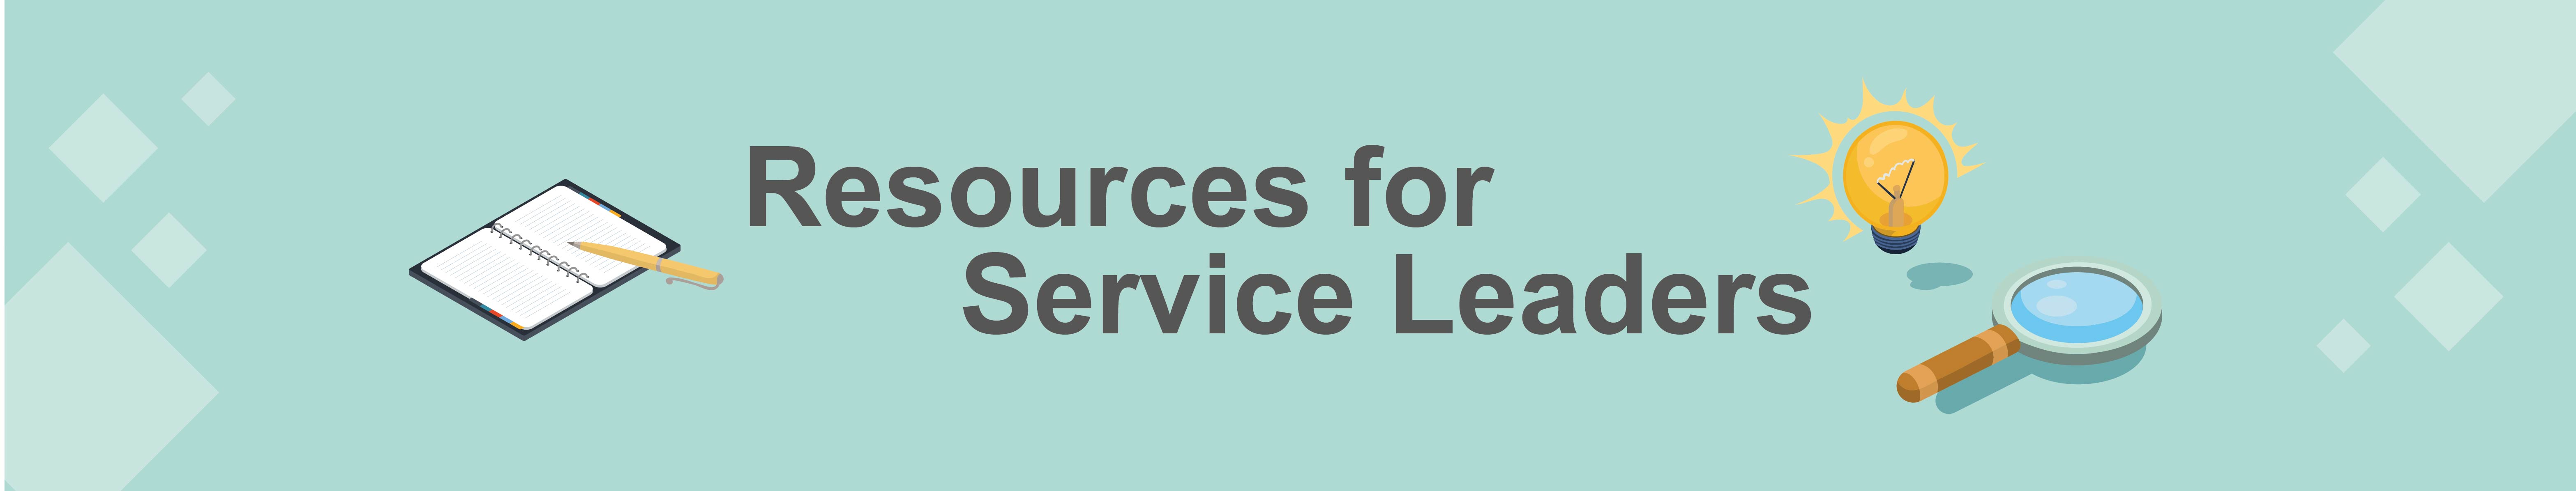 Resources for Services Leaders